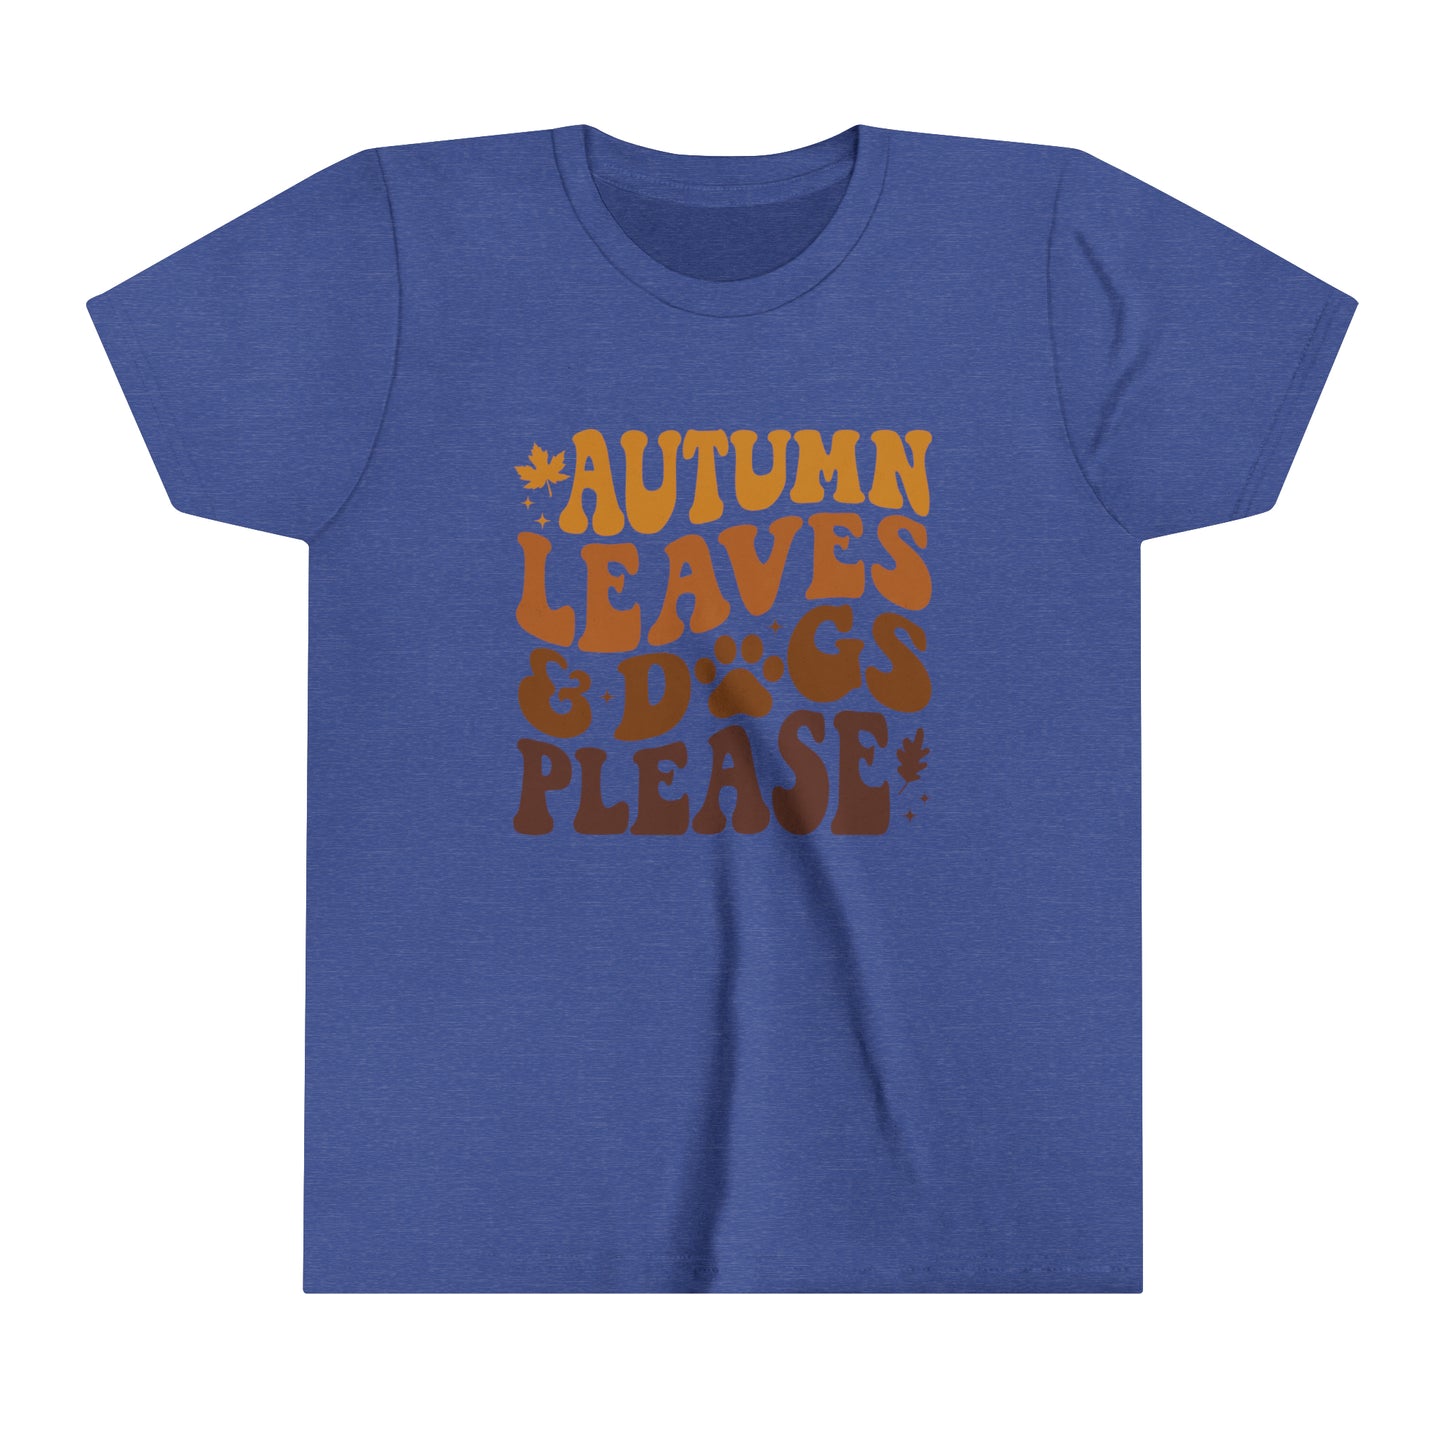 Autumn Leaves and Dogs Please Girl's Youth Short Sleeve Tee